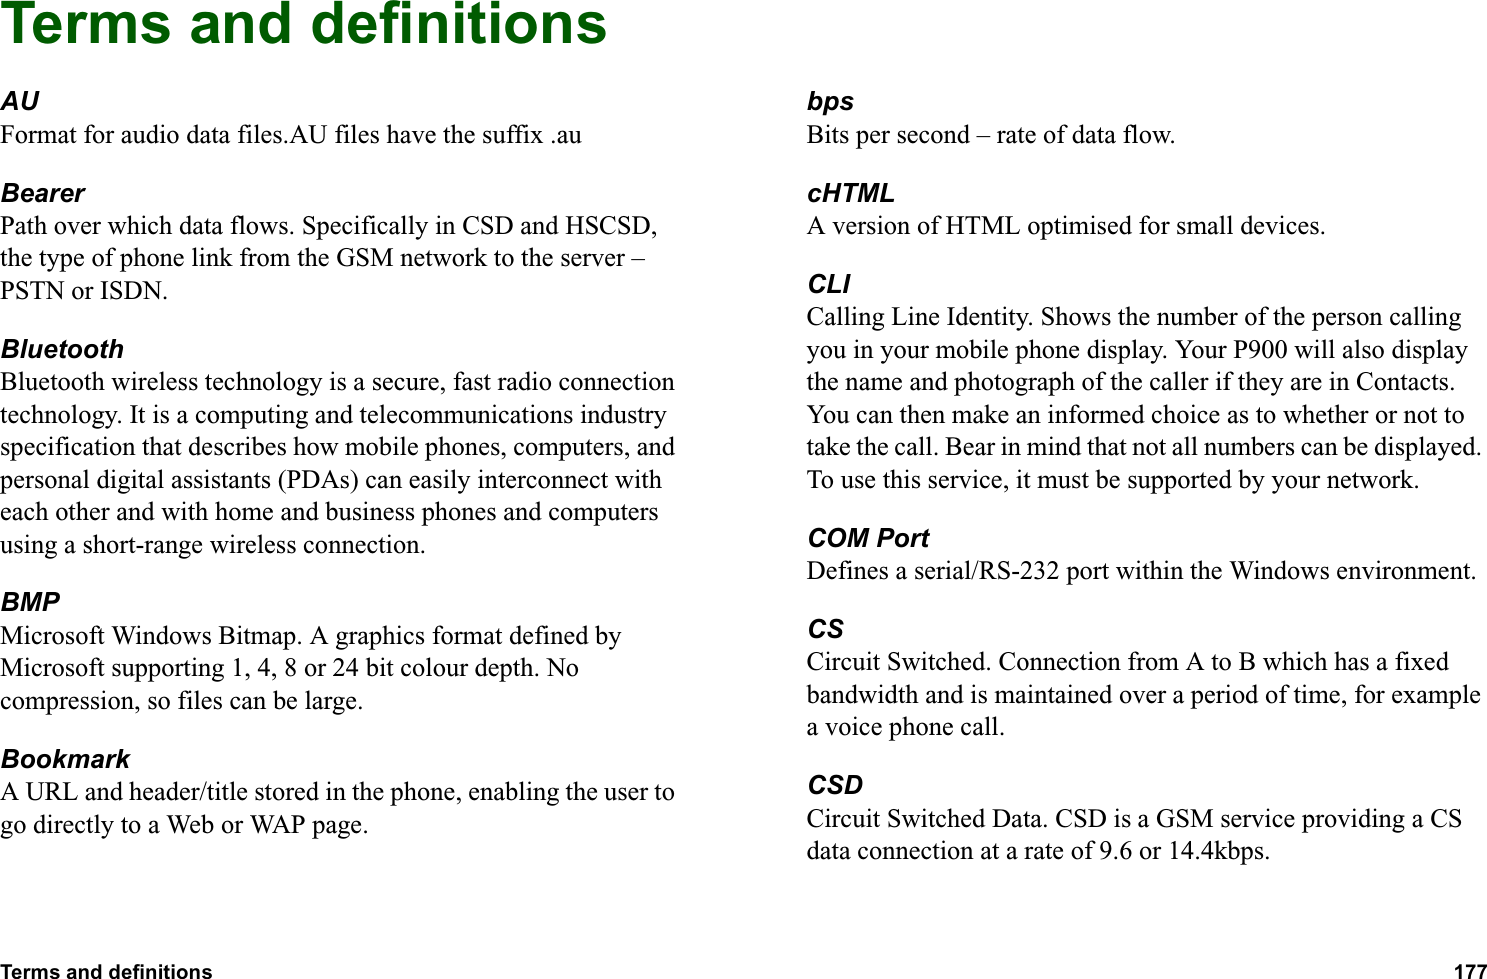 Terms and definitions 177  Terms and definitionsAUFormat for audio data files.AU files have the suffix .auBearerPath over which data flows. Specifically in CSD and HSCSD, the type of phone link from the GSM network to the server – PSTN or ISDN.BluetoothBluetooth wireless technology is a secure, fast radio connection technology. It is a computing and telecommunications industry specification that describes how mobile phones, computers, and personal digital assistants (PDAs) can easily interconnect with each other and with home and business phones and computers using a short-range wireless connection.BMPMicrosoft Windows Bitmap. A graphics format defined by Microsoft supporting 1, 4, 8 or 24 bit colour depth. No compression, so files can be large.BookmarkA URL and header/title stored in the phone, enabling the user to go directly to a Web or WAP page.bpsBits per second – rate of data flow.cHTMLA version of HTML optimised for small devices.CLICalling Line Identity. Shows the number of the person calling you in your mobile phone display. Your P900 will also display the name and photograph of the caller if they are in Contacts. You can then make an informed choice as to whether or not to take the call. Bear in mind that not all numbers can be displayed. To use this service, it must be supported by your network.COM PortDefines a serial/RS-232 port within the Windows environment. CSCircuit Switched. Connection from A to B which has a fixed bandwidth and is maintained over a period of time, for example a voice phone call.CSDCircuit Switched Data. CSD is a GSM service providing a CS data connection at a rate of 9.6 or 14.4kbps.